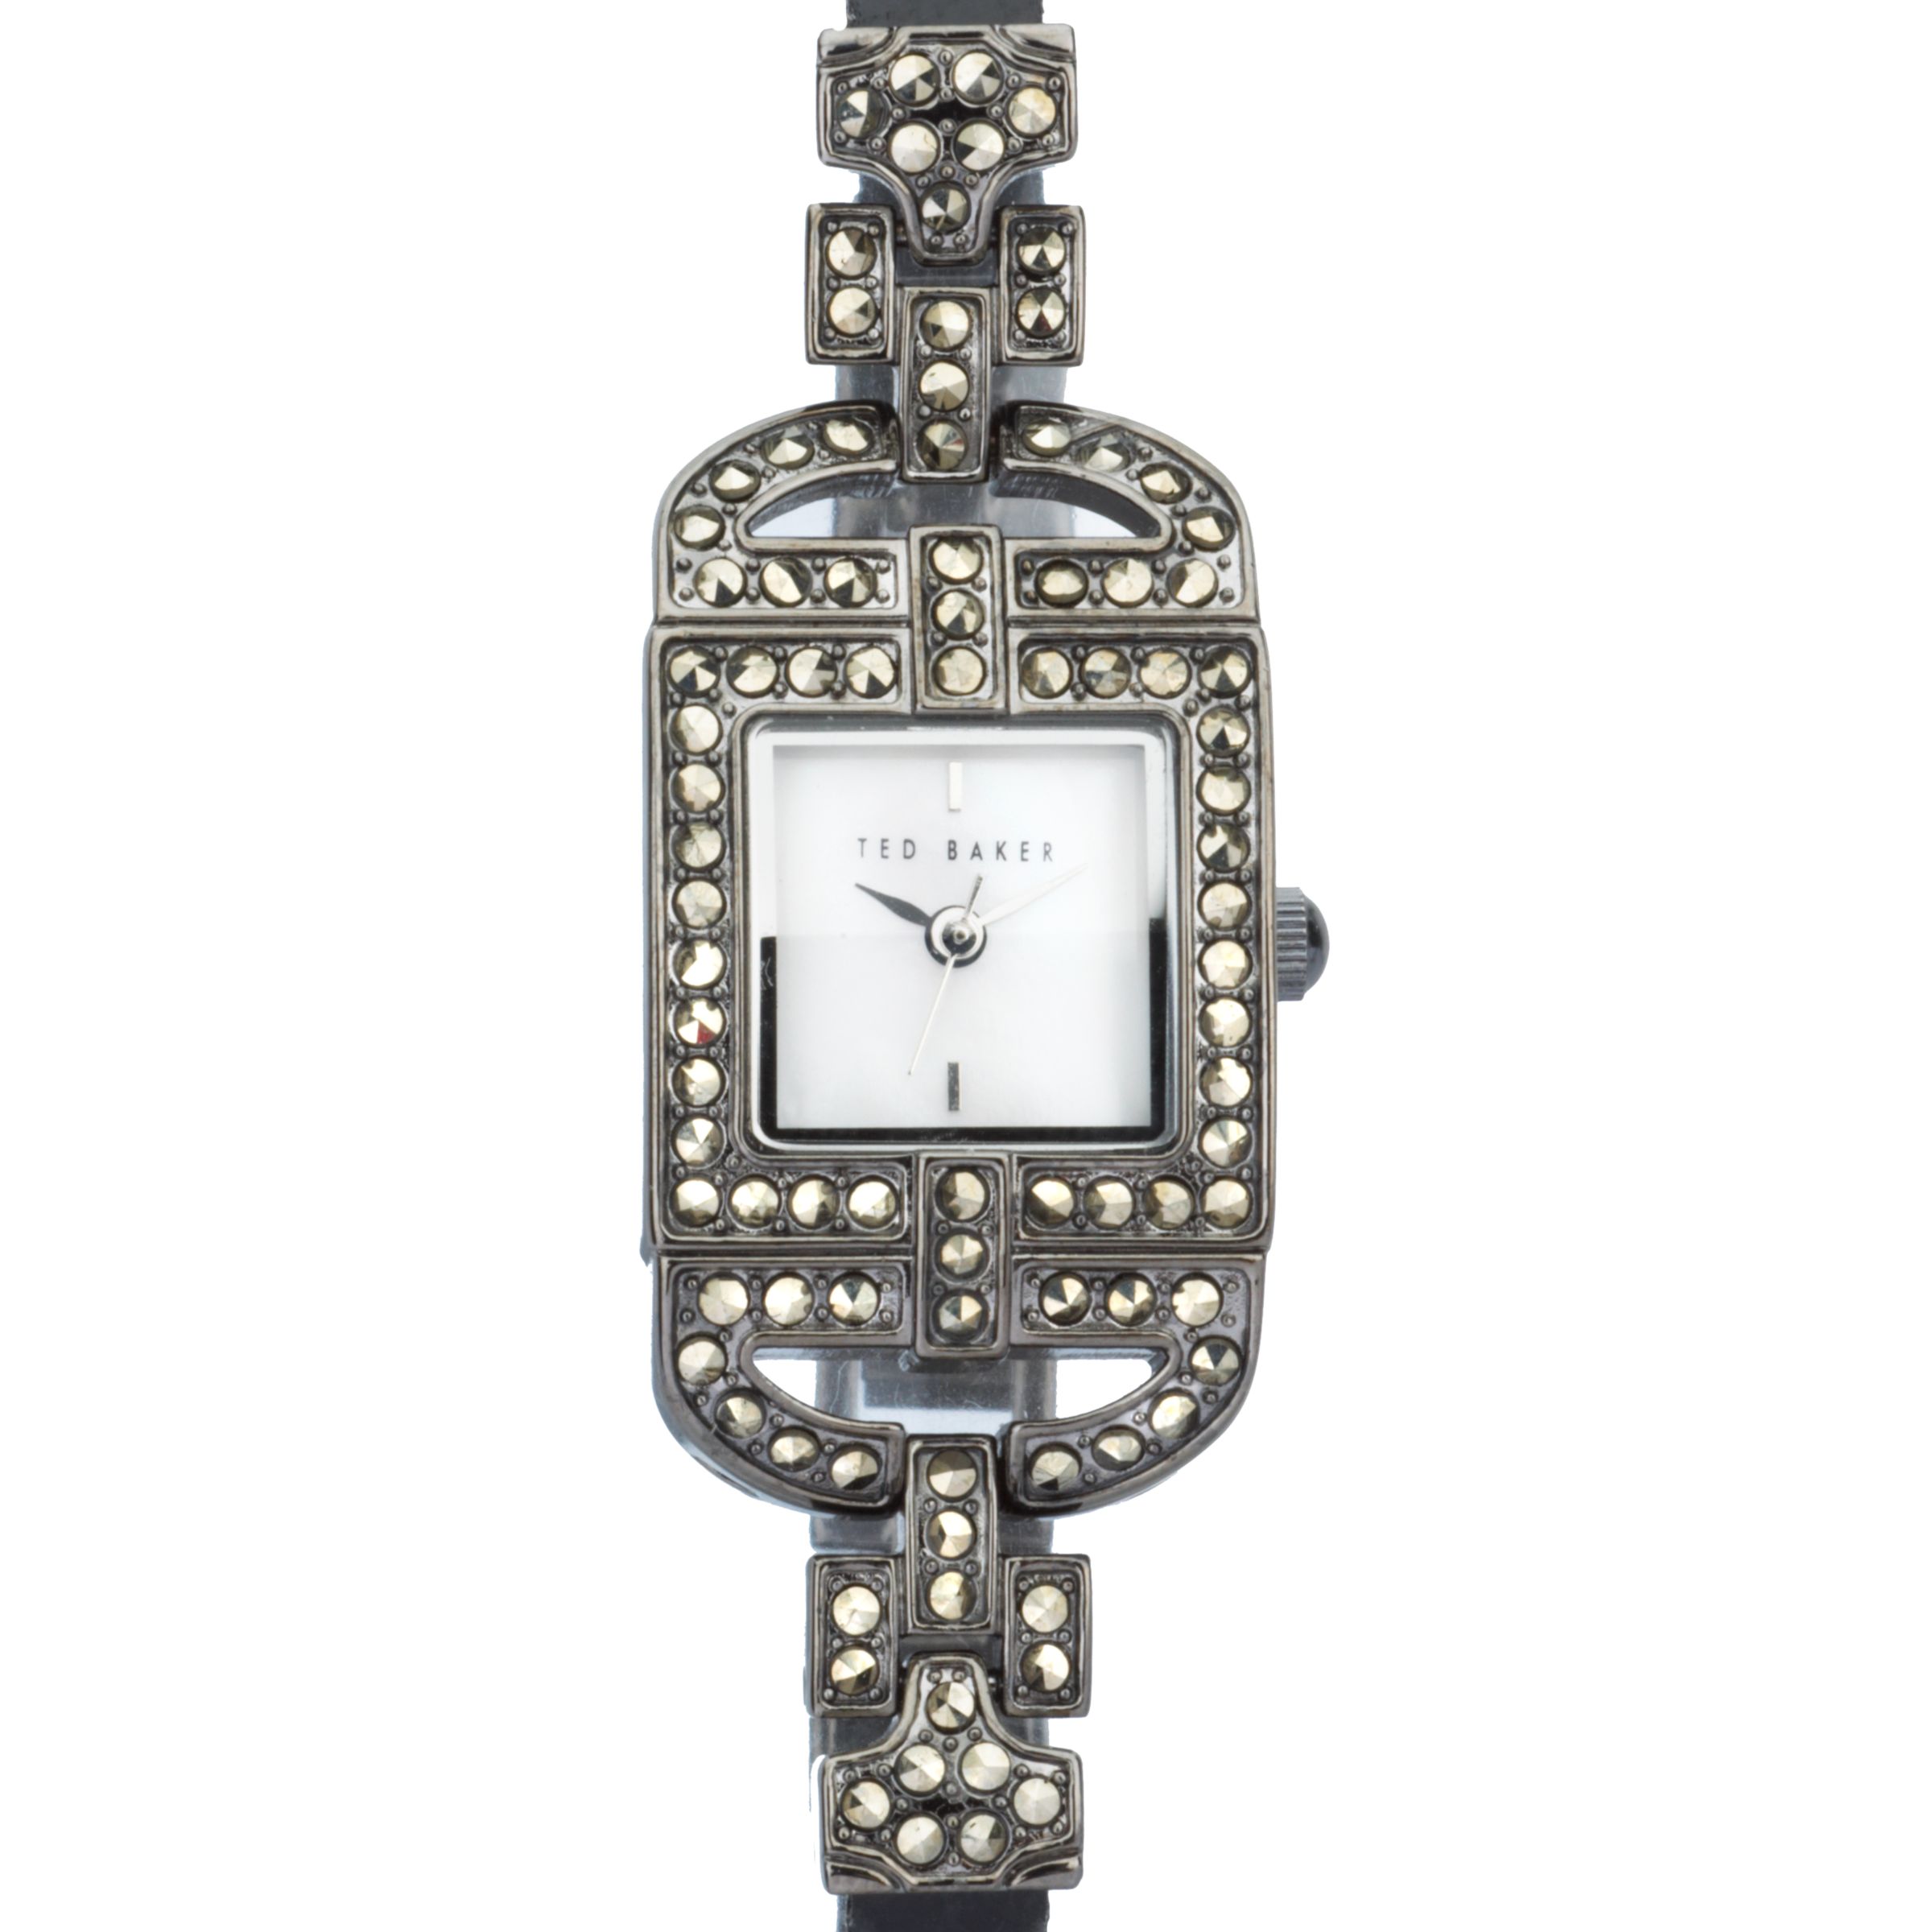 Ted Baker TB275BK Mother of Pearl Dial Watch